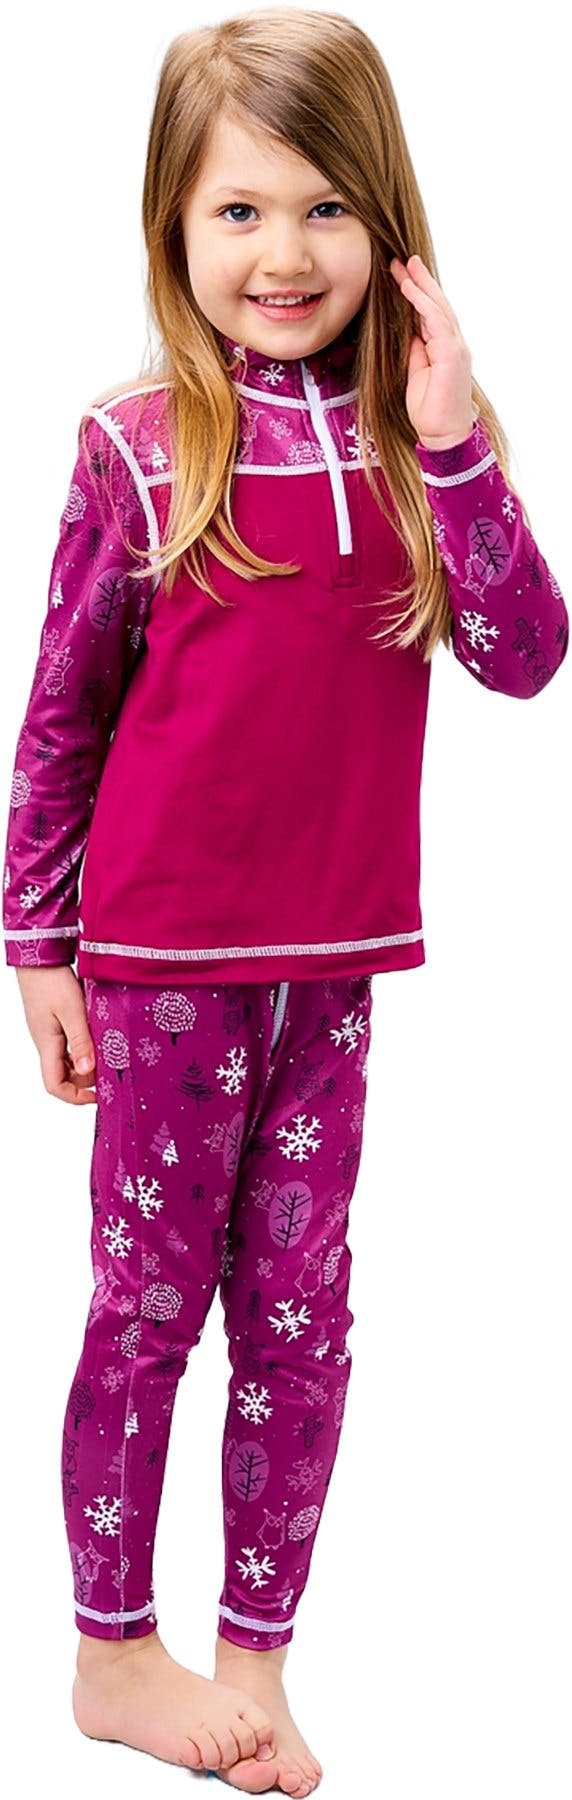 Product image for Altropos 1/2 Zip Midlayer Printed Top - Kids